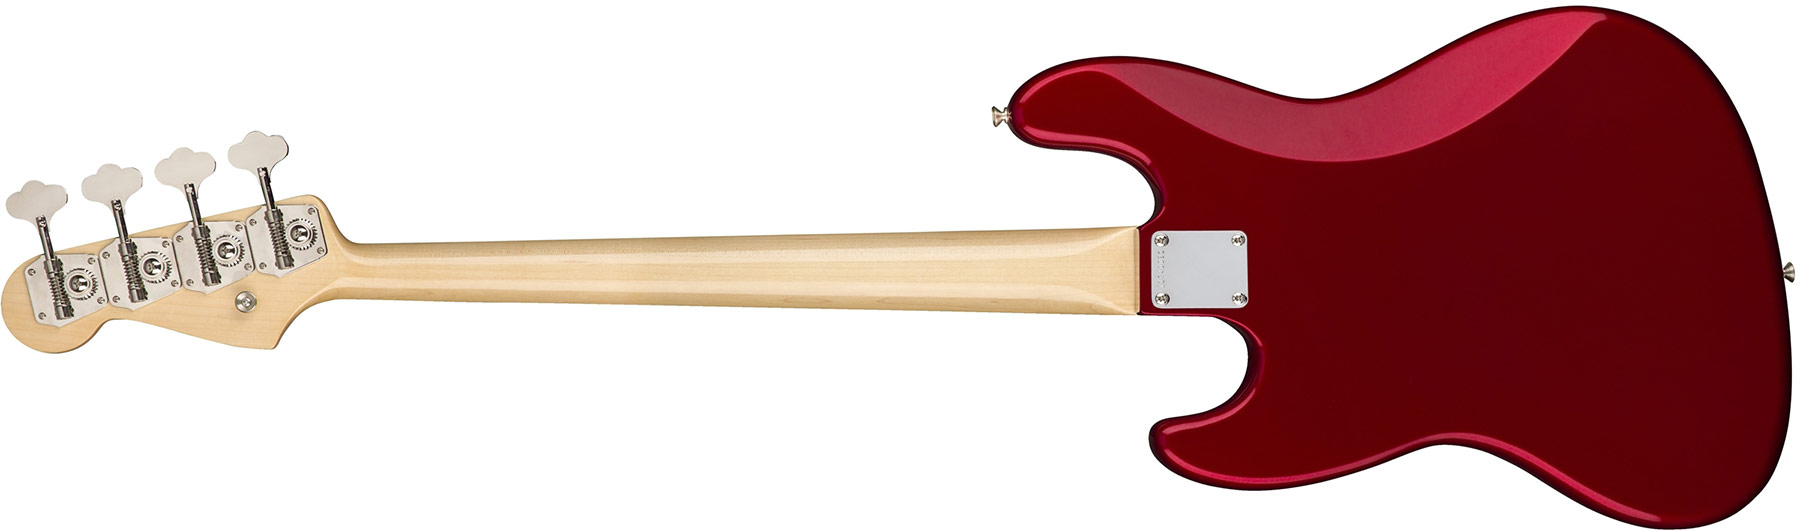 Fender Jazz Bass '60s American Original Usa Rw - Candy Apple Red - Solid body electric bass - Variation 2